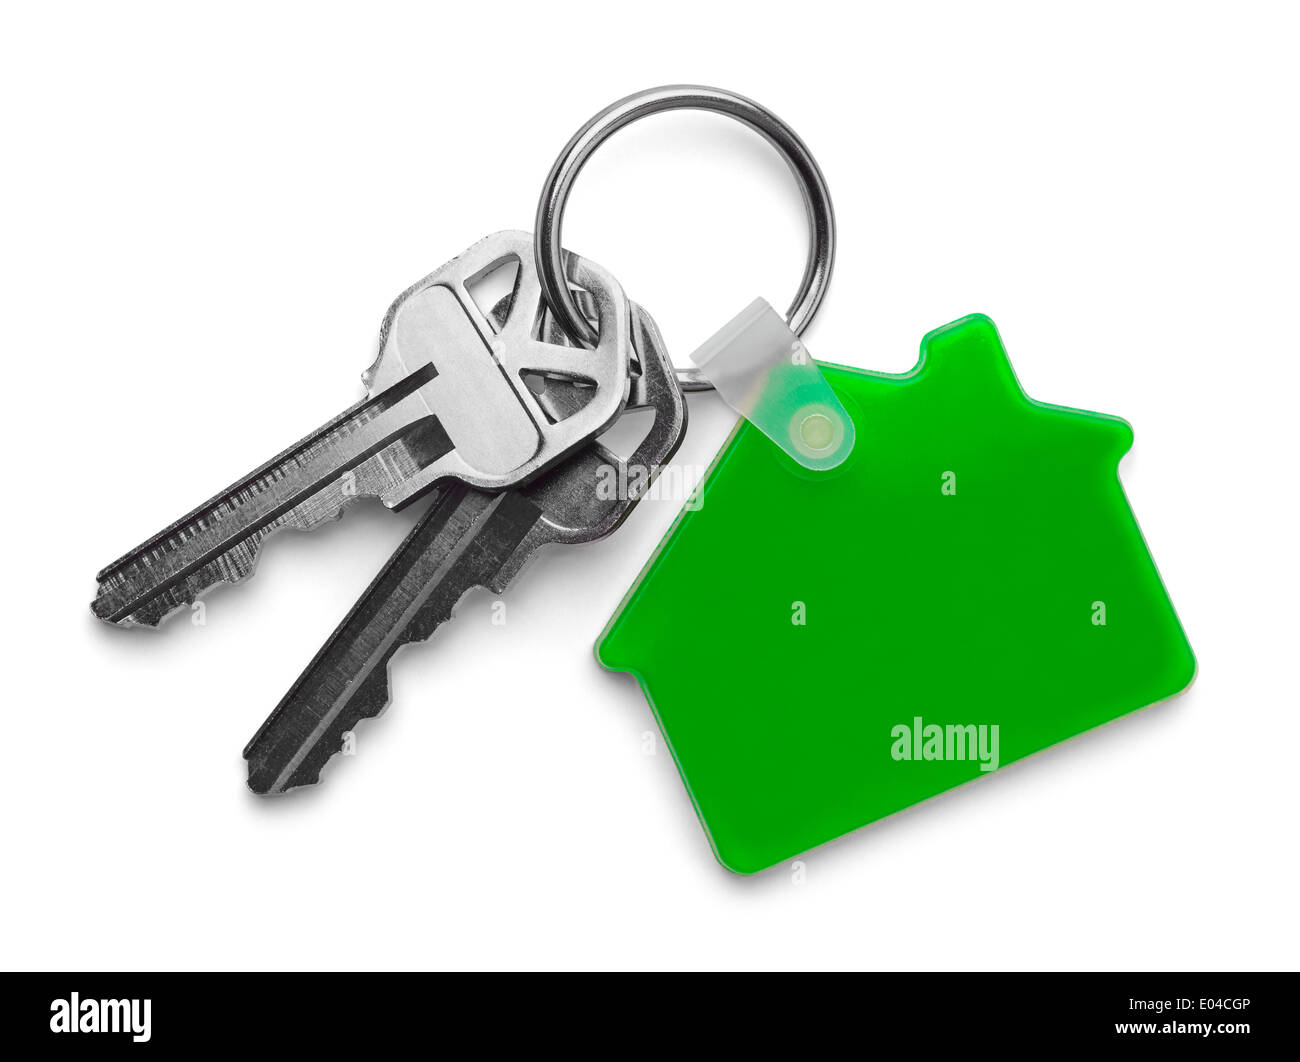 House keys with Green House Keychain Isolated on White Background. Stock Photo